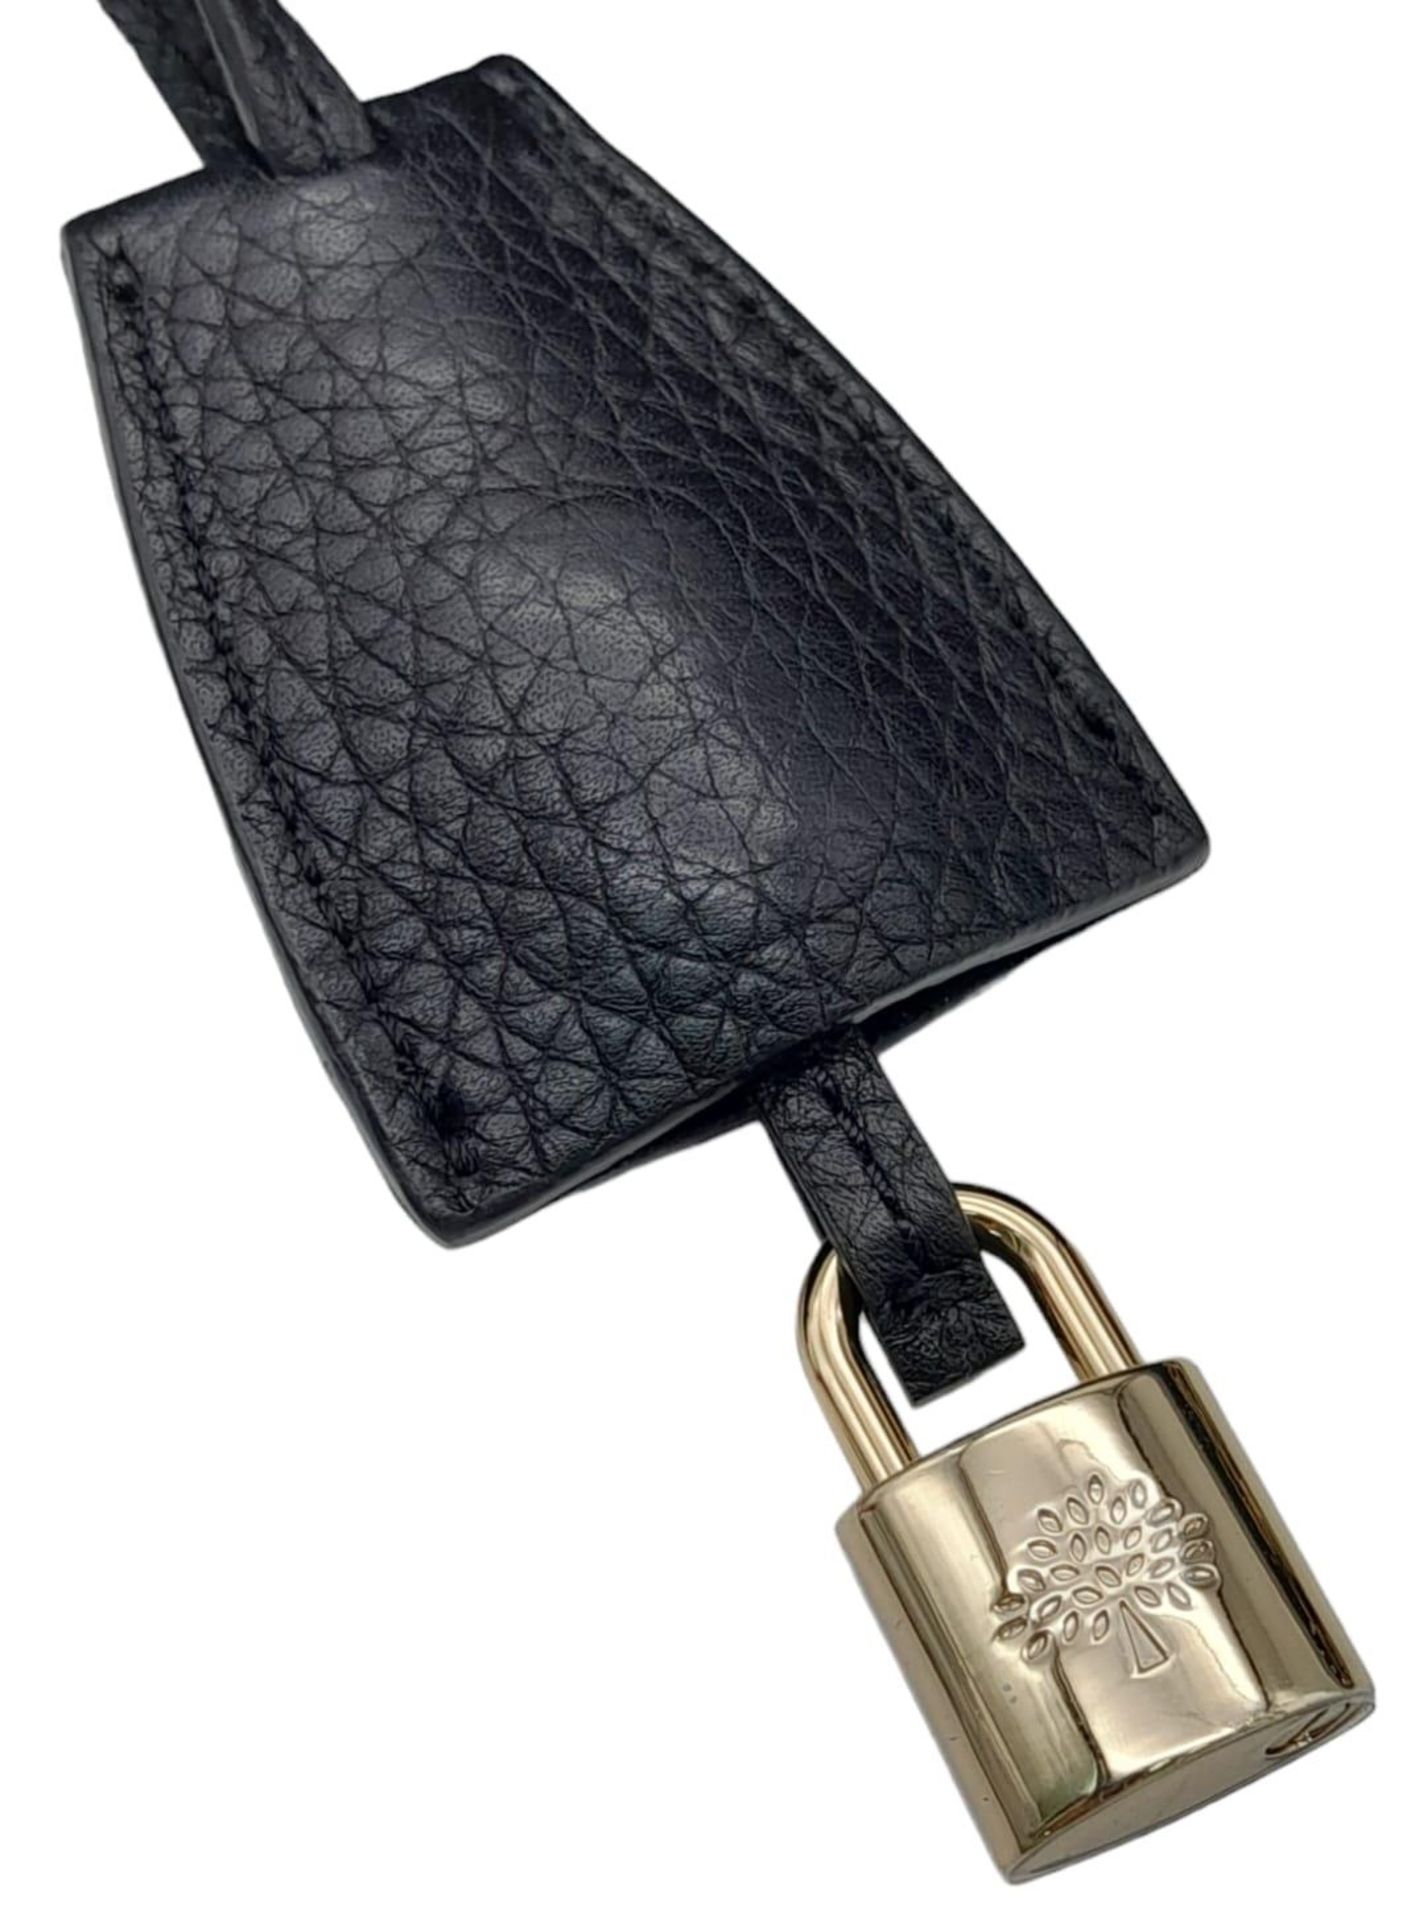 A Black Mulberry Lily Bag. With a Classic Grain Leather, Flap Over Design, Signature Postman Style - Image 6 of 10